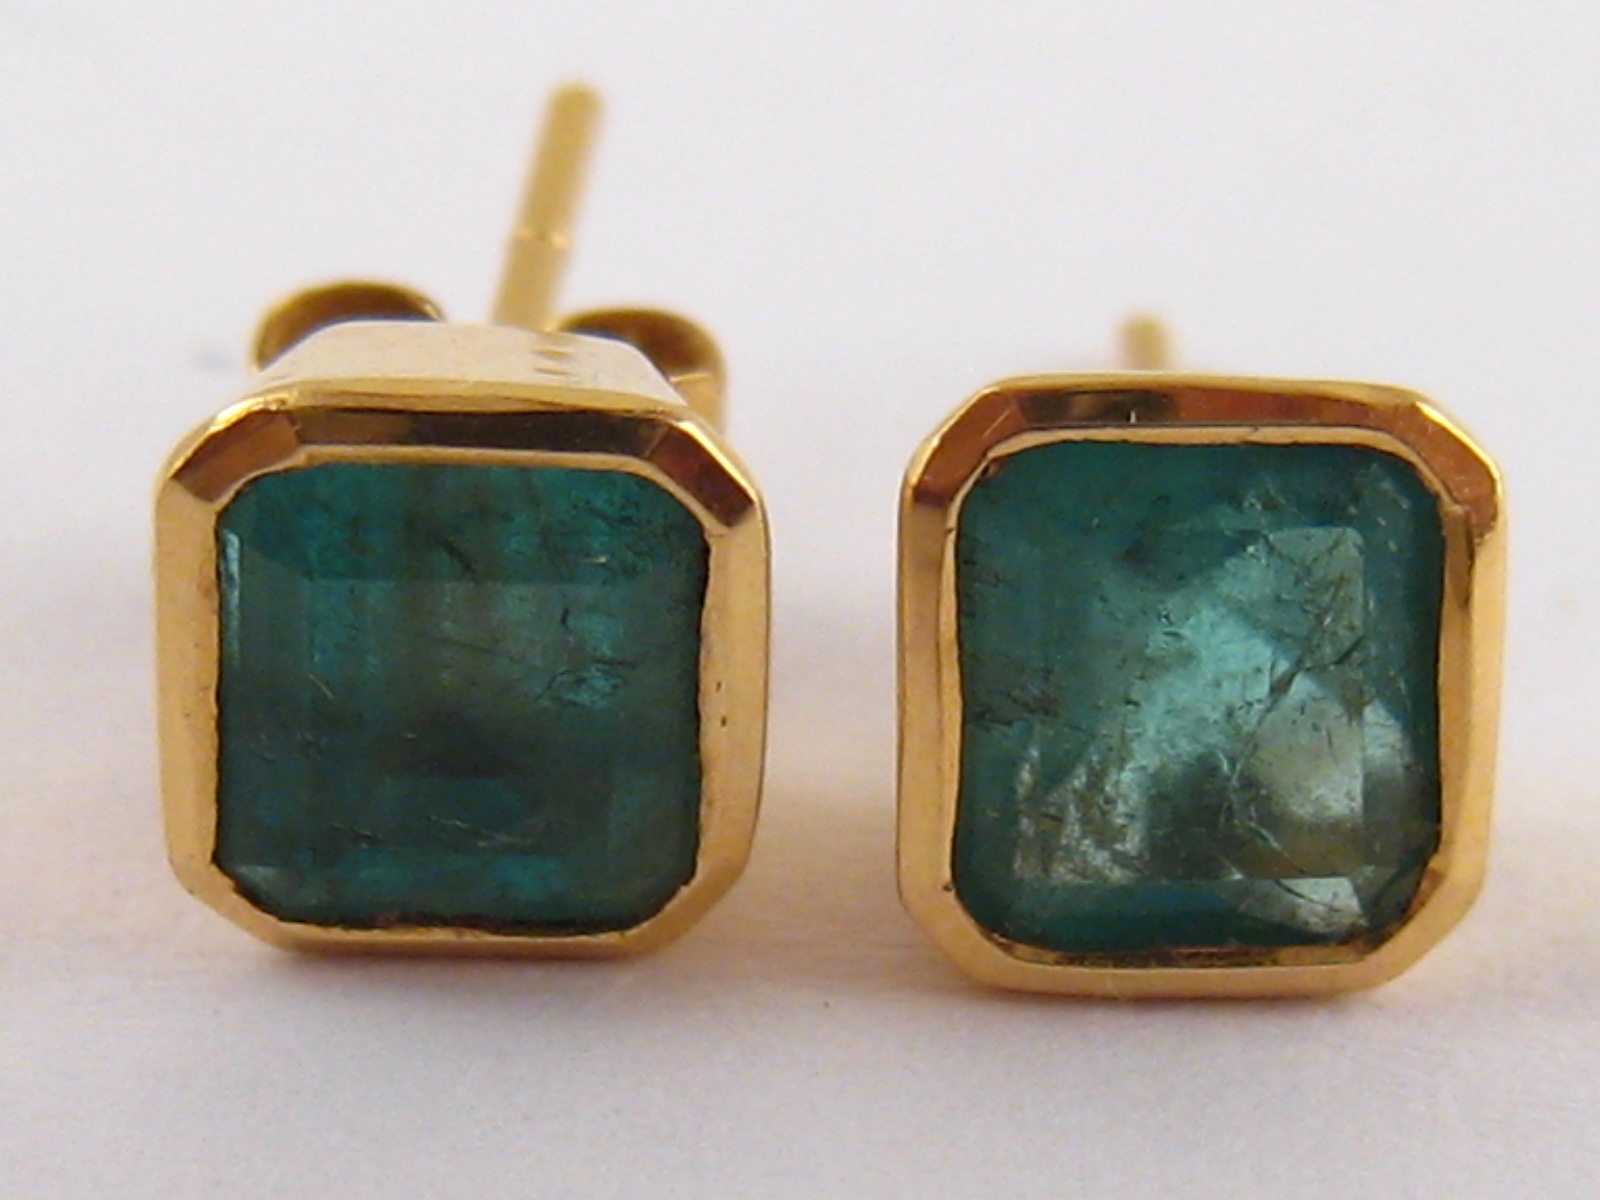 A pair of emerald ear studs, emeralds approx 6x5mm, 1.8 gms.